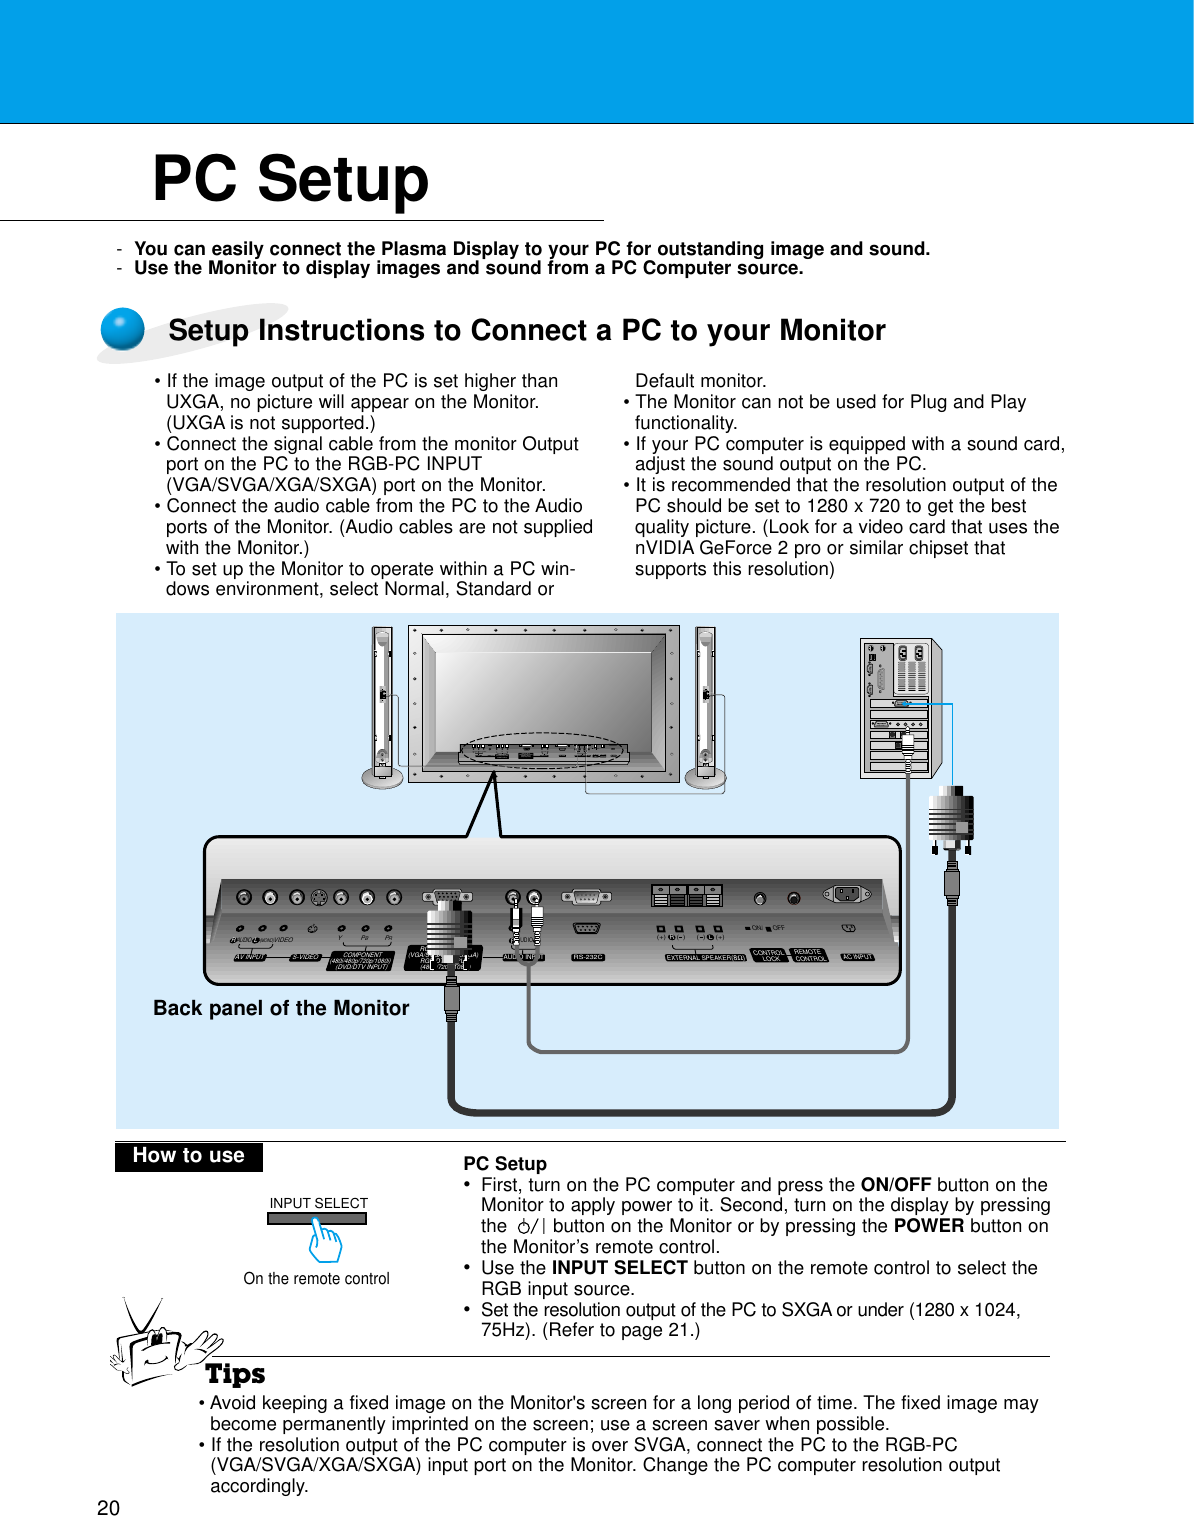 20PC Setup-You can easily connect the Plasma Display to your PC for outstanding image and sound.-Use the Monitor to display images and sound from a PC Computer source.On the remote controlHow to use(+) (  ) (+)(  )AUDIO(MONO)RLVIDEO Y PBRPAV INPUTAUDIORL RLEXTERNAL SPEAKER (8Ω) AC INPUTAUDIO INPUTS-VIDEO COMPONENT(480i/480p/720p/1080i)RGB-PC INPUT(VGA/SVGA/XGA/SXGA)RGB-DTV INPUT(480p/720p/1080i)(DVD/DTV INPUT)(+) (  ) (+)(  )AUDIO(MONO)RLAV INPUT S-VIDEOCOMPONENT(480i/480p/720p/1080i)(DVD/DTV INPUT)RGB-PC INPUTRAUDIO INPUTEXTERNAL SPEAKER(8Ω)RLAC INPUTLAUDIO(VGA/SVGA/XGA/SXGA)RGB-DTV INPUT(480p/720p/1080i)VIDEO YPBPRRS-232CRS-232CCONTROLLOCK REMOTECONTROLREMOTECONTROLCONTROLLOCKON/ OFFON/ OFFTipsBack panel of the MonitorINPUT SELECTSetup Instructions to Connect a PC to your Monitor• If the image output of the PC is set higher thanUXGA, no picture will appear on the Monitor.(UXGA is not supported.)• Connect the signal cable from the monitor Outputport on the PC to the RGB-PC INPUT(VGA/SVGA/XGA/SXGA) port on the Monitor.• Connect the audio cable from the PC to the Audioports of the Monitor. (Audio cables are not suppliedwith the Monitor.)• To set up the Monitor to operate within a PC win-dows environment, select Normal, Standard orDefault monitor.• The Monitor can not be used for Plug and Playfunctionality.• If your PC computer is equipped with a sound card,adjust the sound output on the PC.• It is recommended that the resolution output of thePC should be set to 1280 x 720 to get the bestquality picture. (Look for a video card that uses thenVIDIA GeForce 2 pro or similar chipset that supports this resolution)PC Setup•First, turn on the PC computer and press the ON/OFF button on theMonitor to apply power to it. Second, turn on the display by pressingthe        button on the Monitor or by pressing the POWER button onthe Monitor’s remote control.•Use the INPUT SELECT button on the remote control to select theRGB input source.•Set the resolution output of the PC to SXGA or under (1280 x 1024,75Hz). (Refer to page 21.)• Avoid keeping a fixed image on the Monitor&apos;s screen for a long period of time. The fixed image maybecome permanently imprinted on the screen; use a screen saver when possible.• If the resolution output of the PC computer is over SVGA, connect the PC to the RGB-PC(VGA/SVGA/XGA/SXGA) input port on the Monitor. Change the PC computer resolution outputaccordingly.